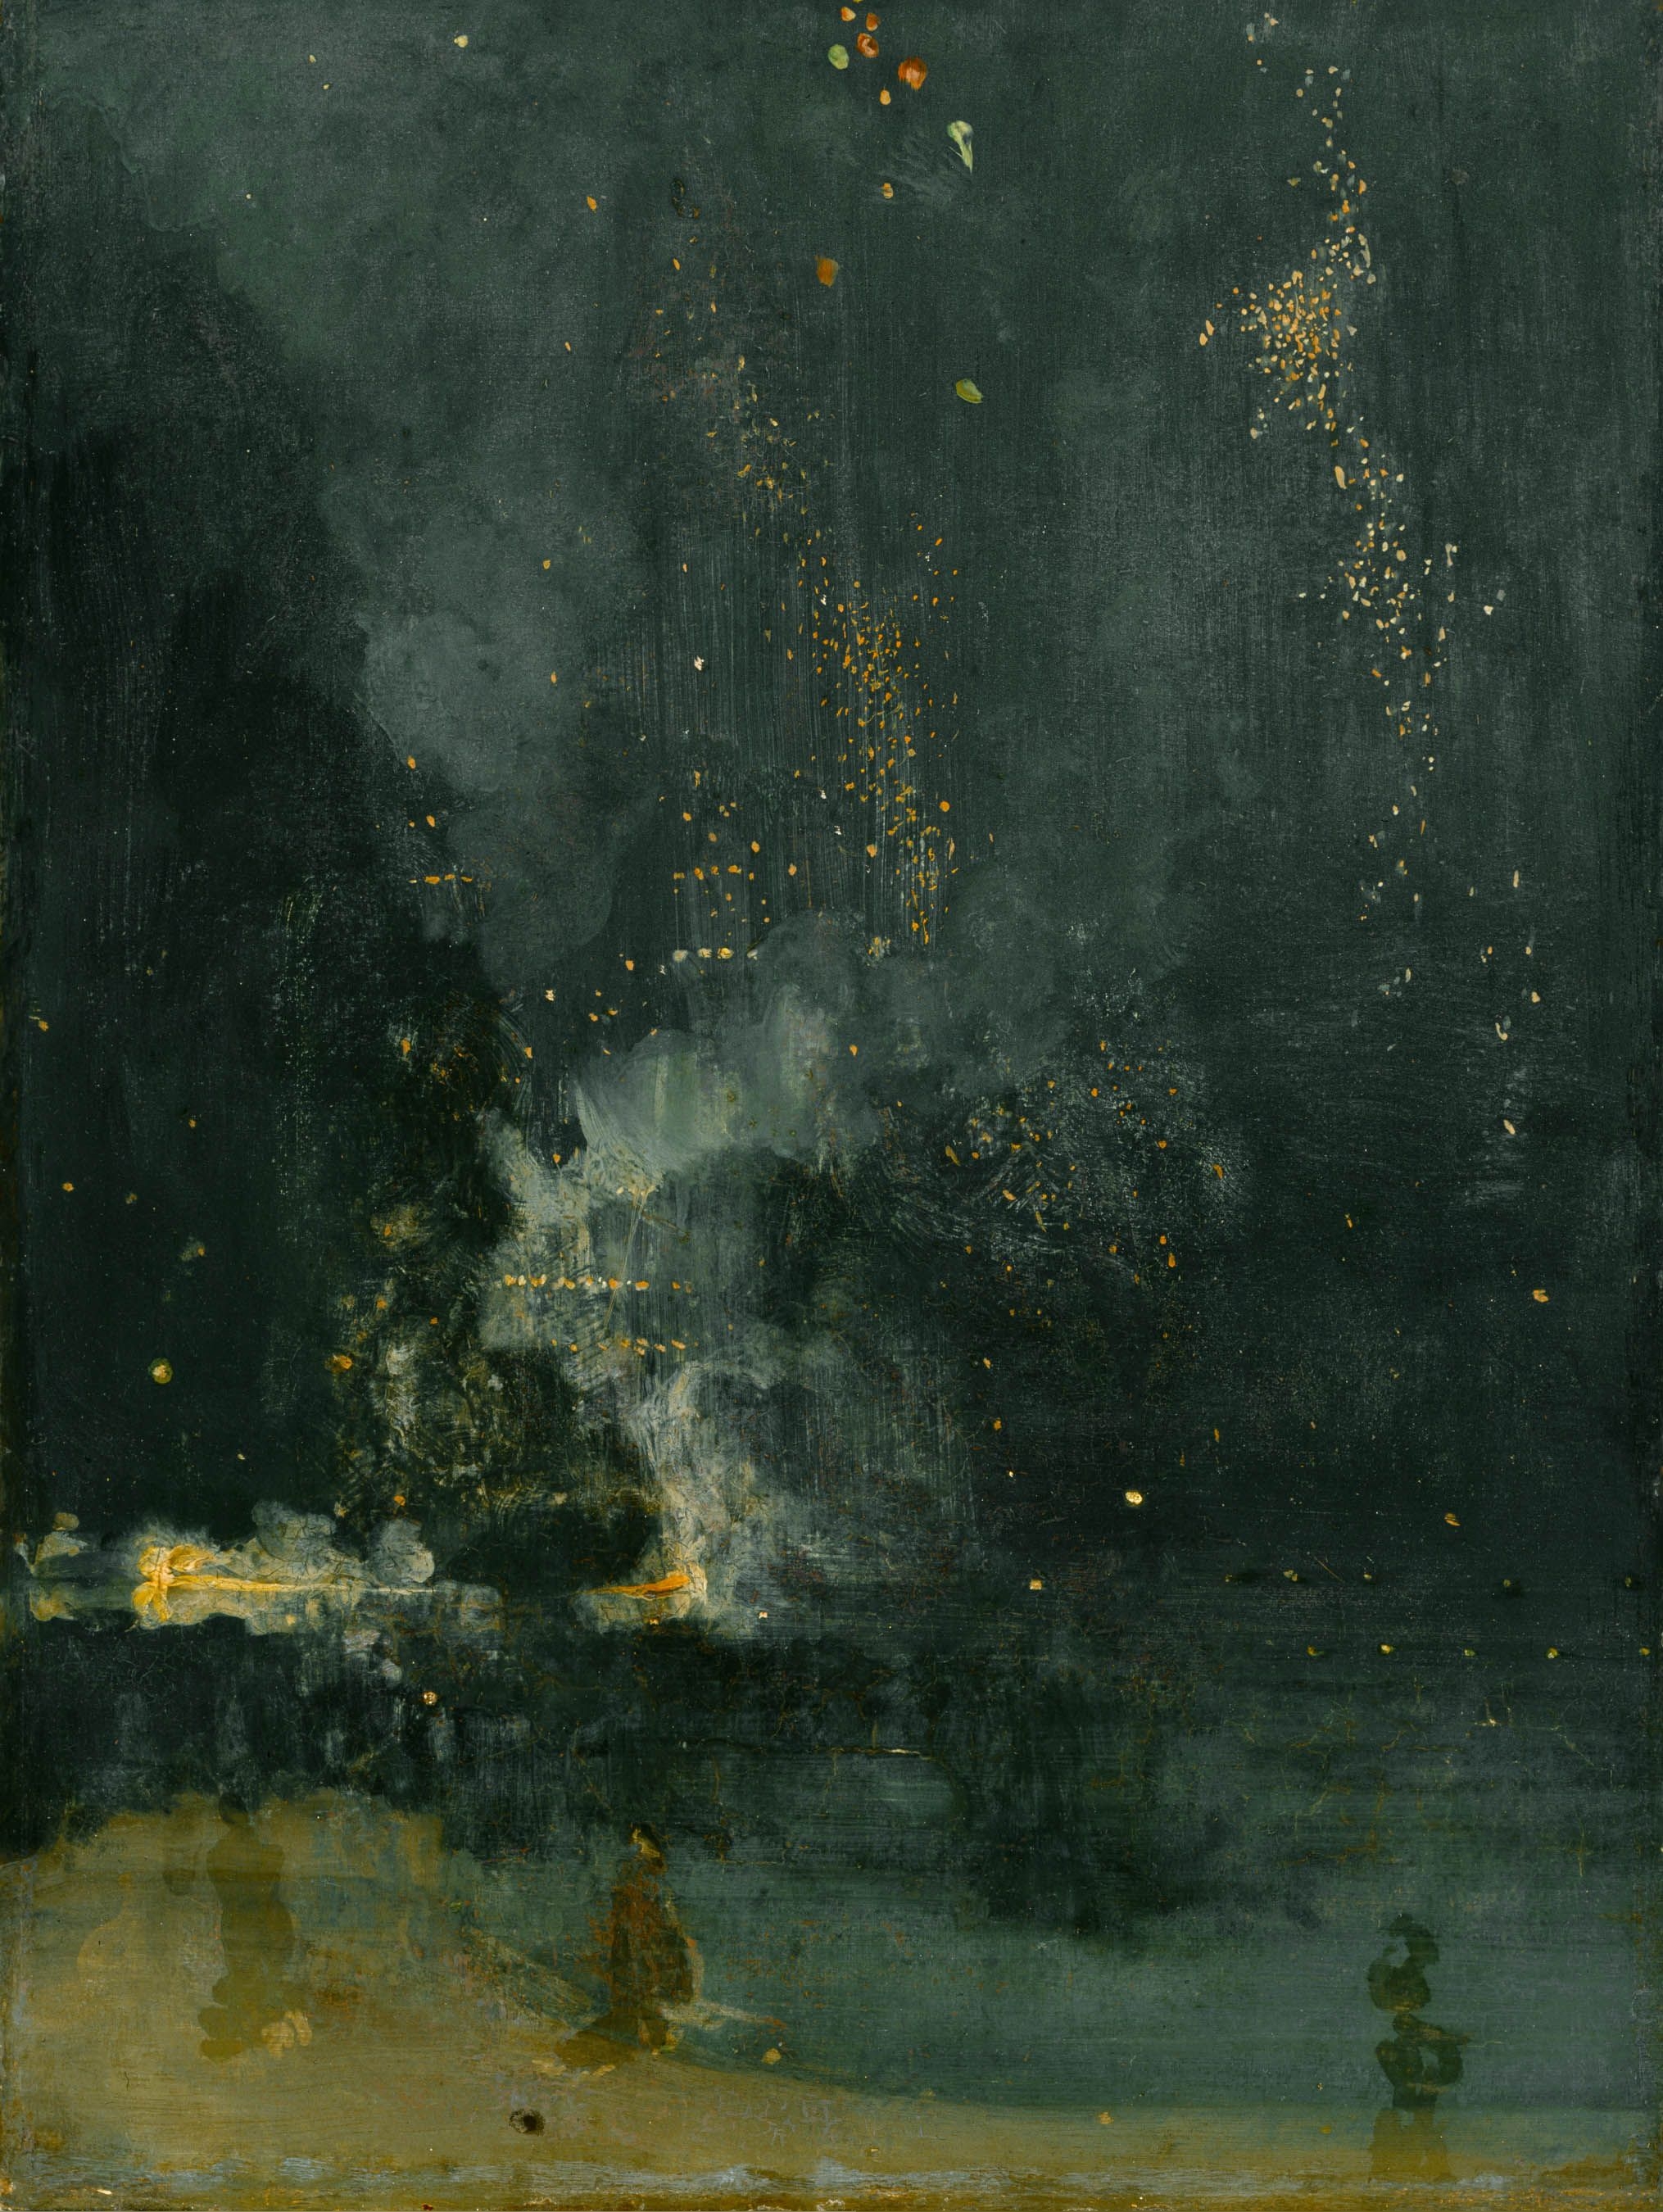 Nocturne in Black and Gold – The Falling Rocket, James Abbott McNeill Whistler, 1872.jpg